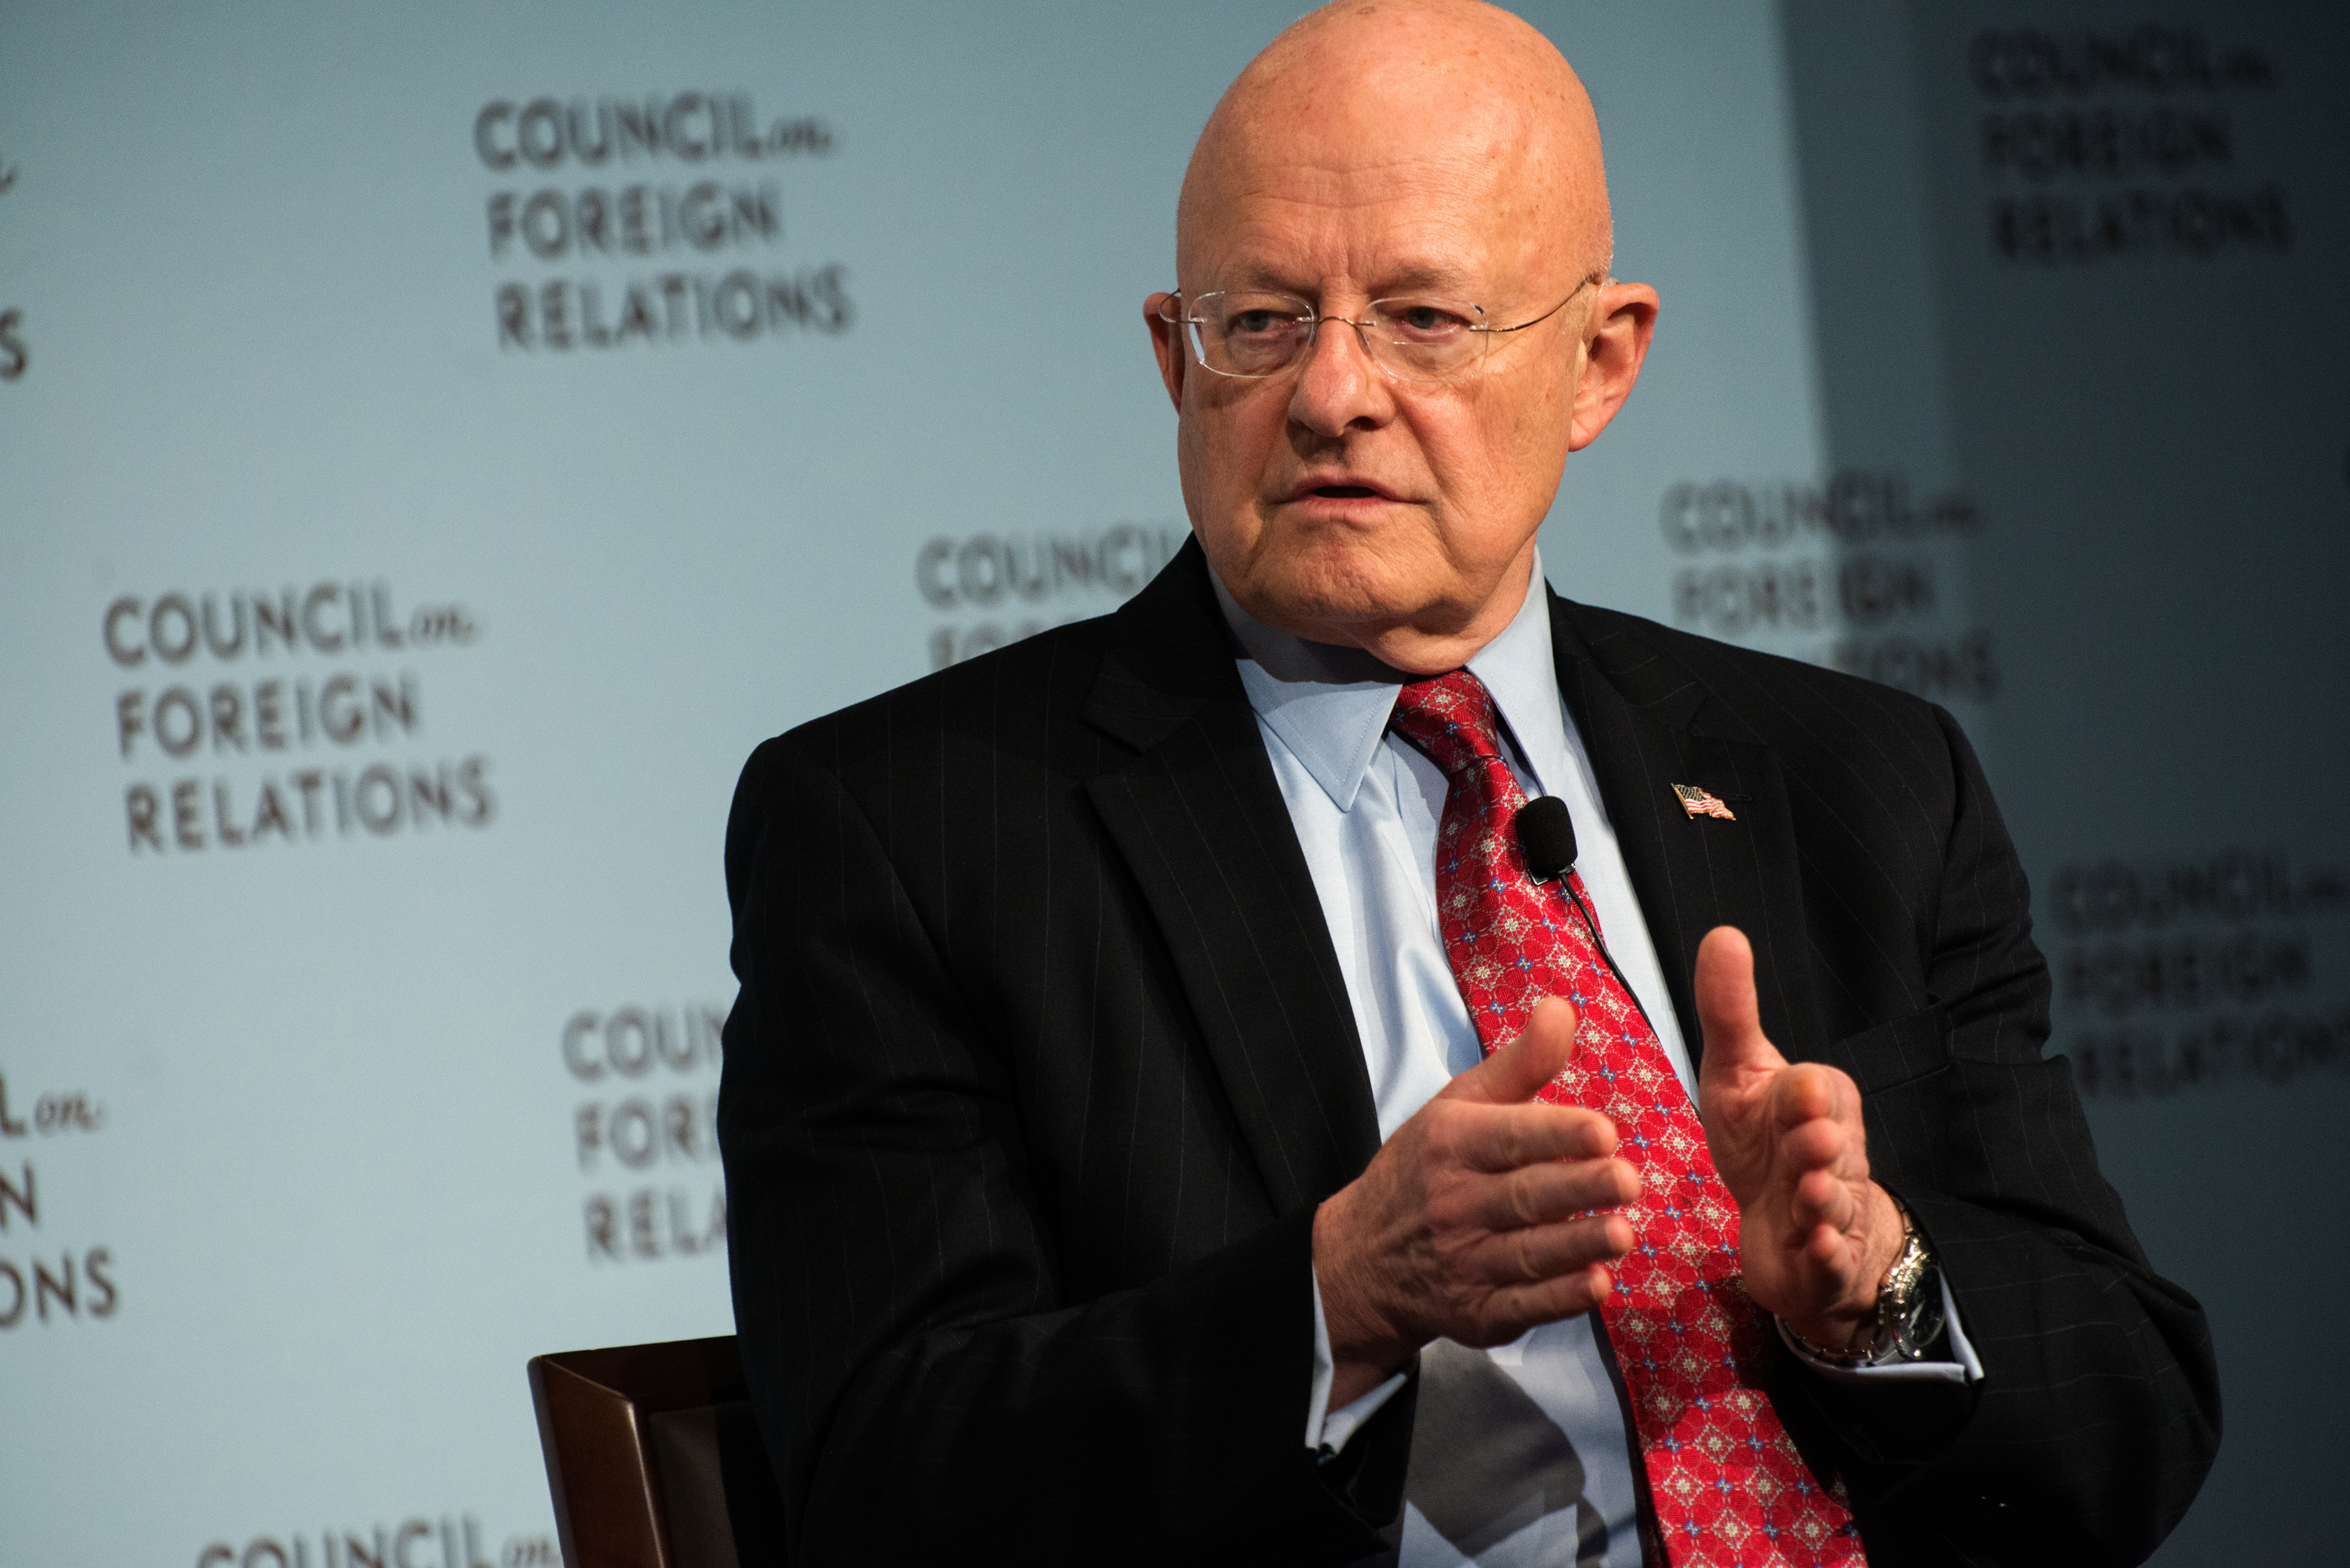 Director of National Intelligence James Clapper speaks at the Council on Foreign Relations on March 2, 2015 in New York City. (Bryan Thomas&mdash;Getty Images)